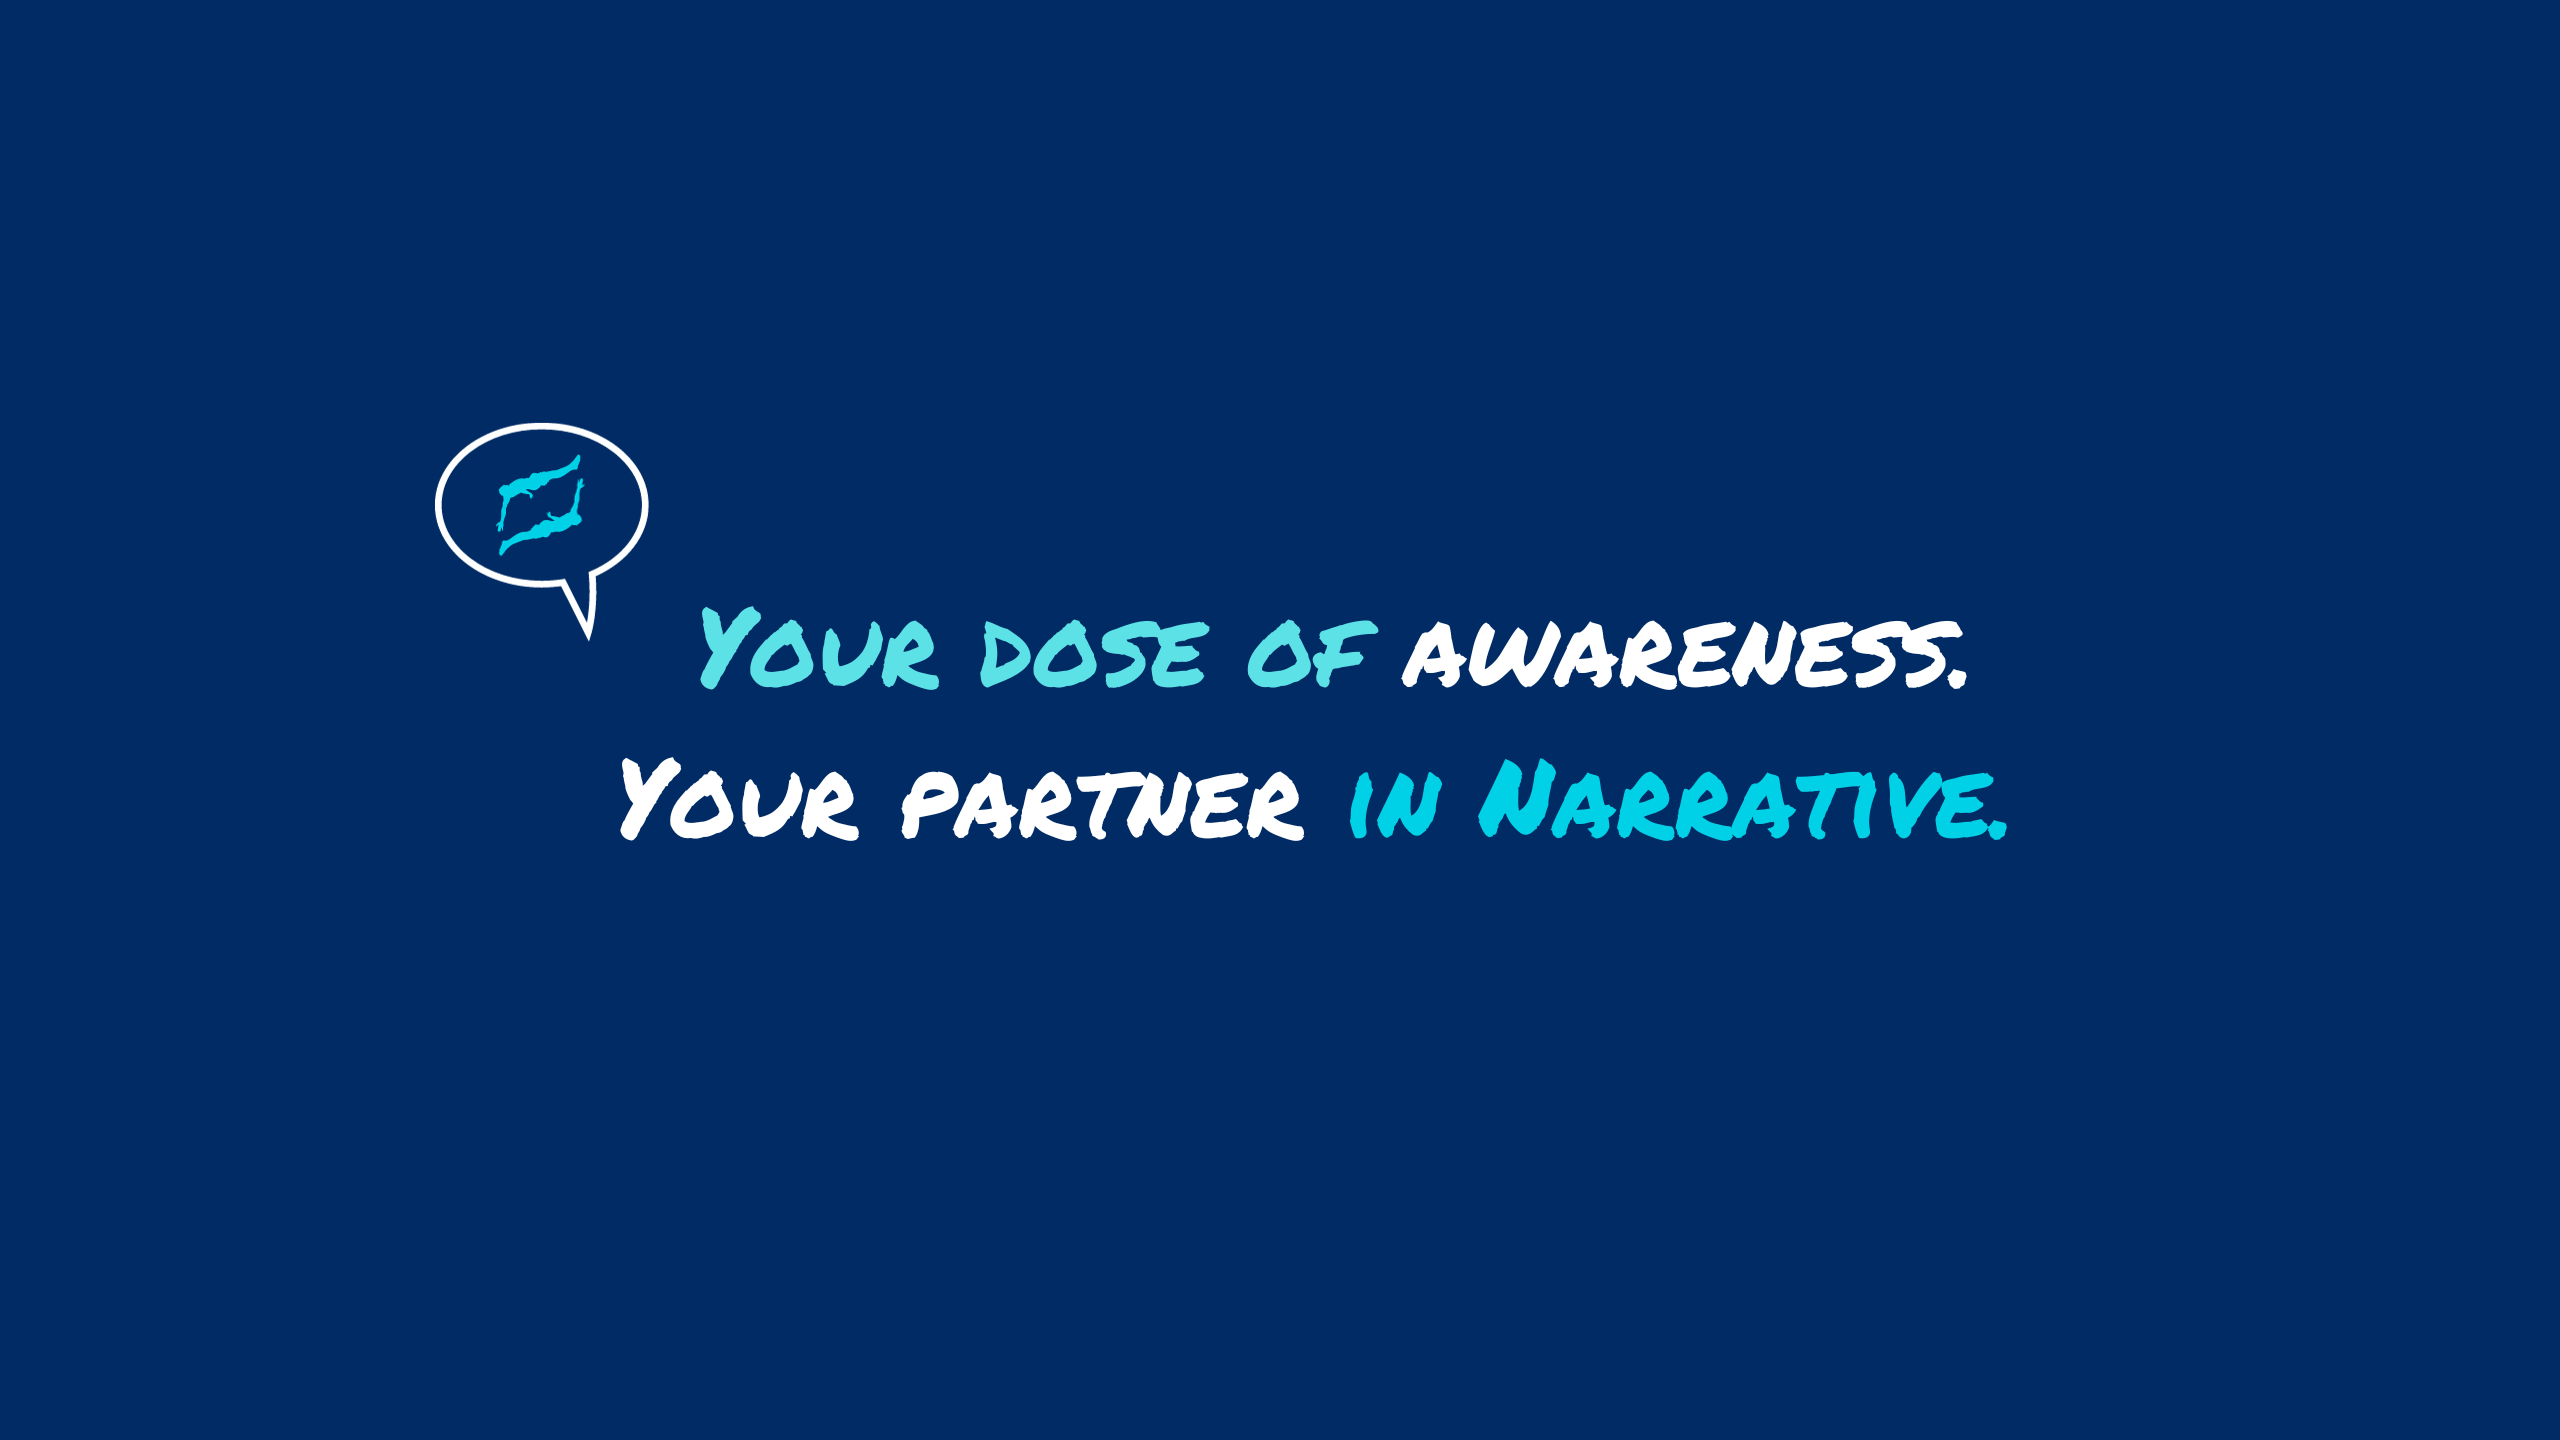 Banner and logo that reads Your dose of awareness. Your partner in narrative.